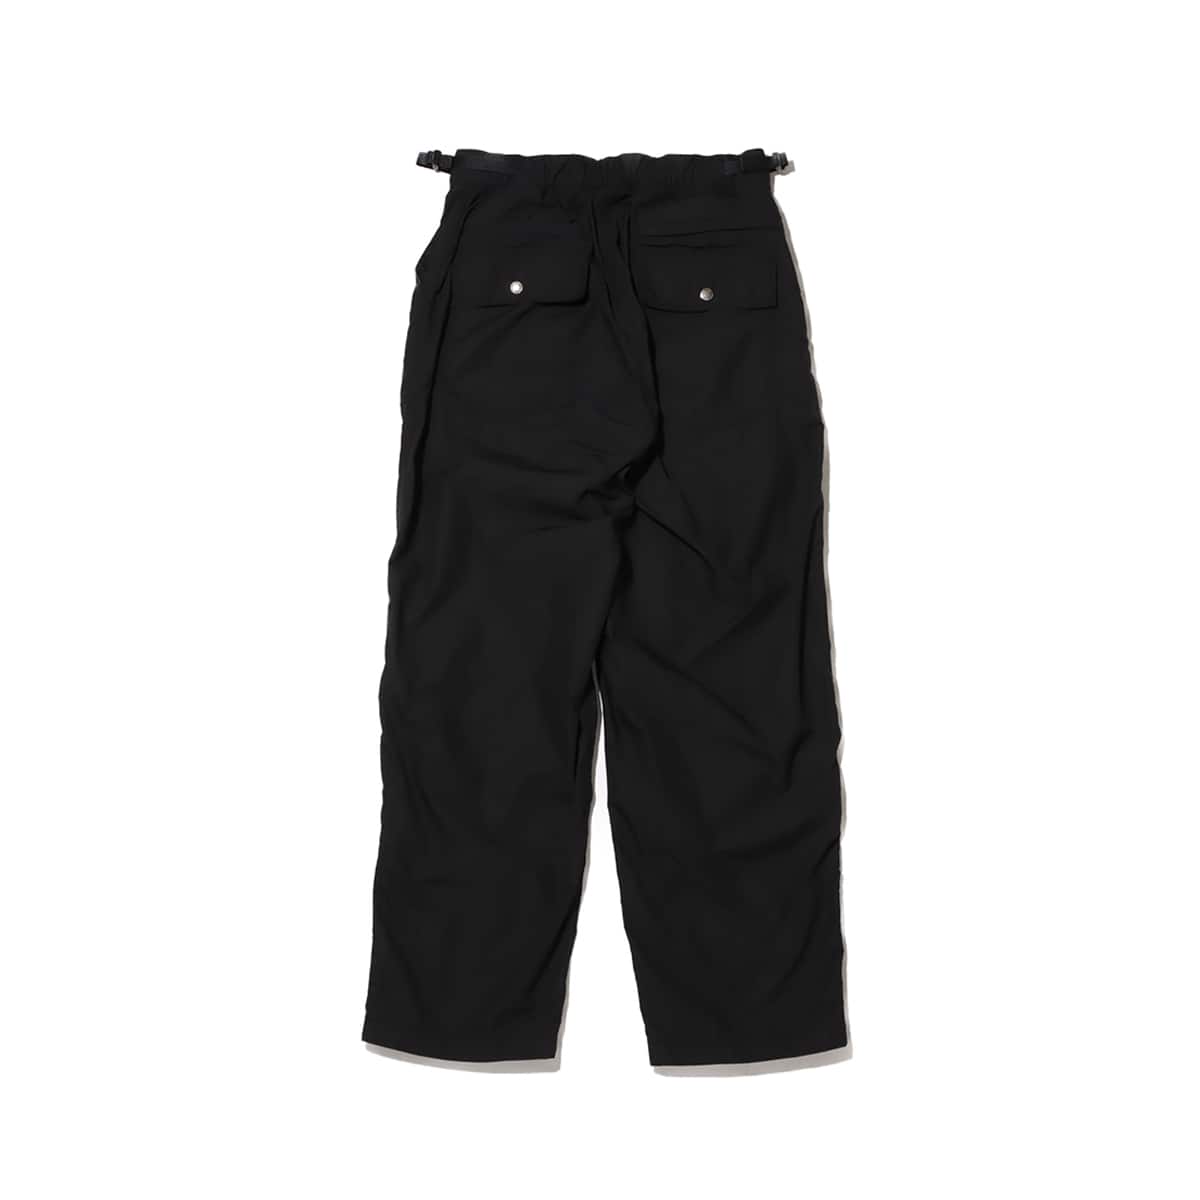 THE NORTH FACE PURPLE LABEL 65/35 Field Pants Black 24SS-I